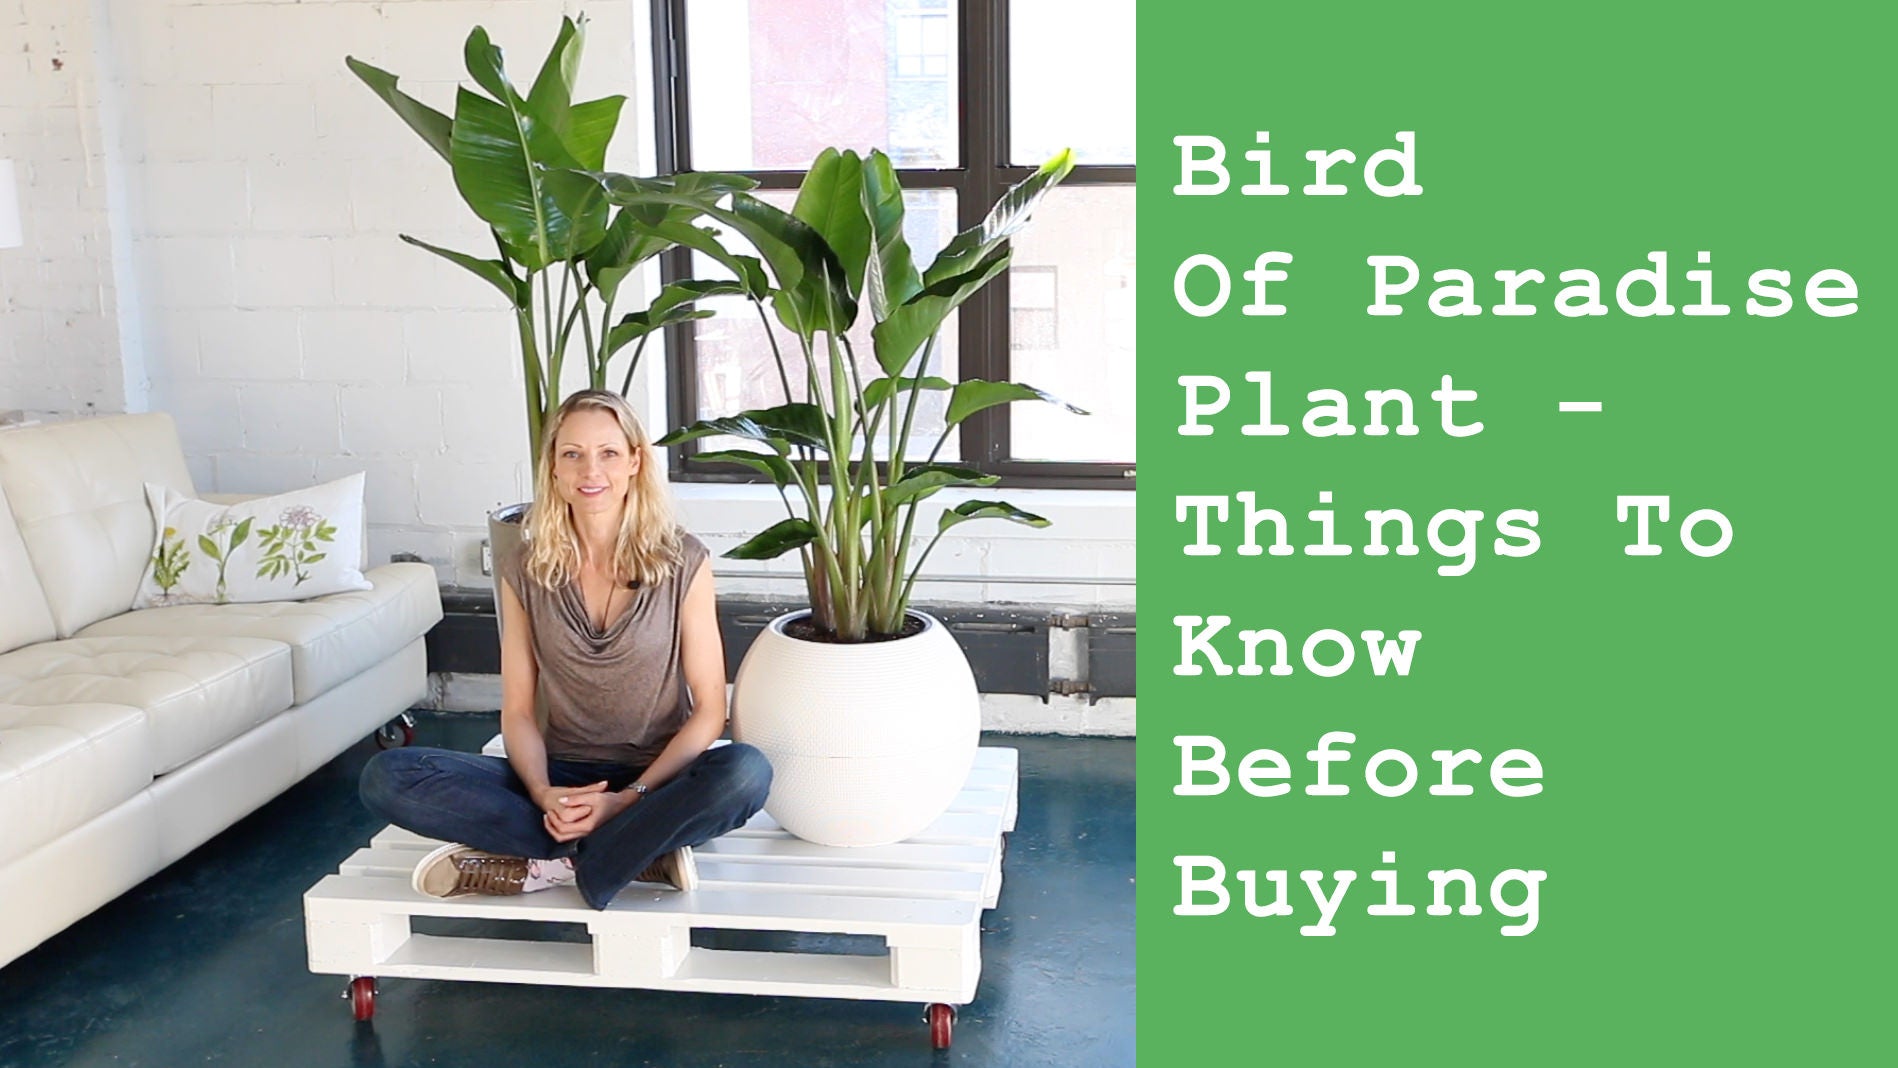 Video about the key tips to know before buying bird of paradise plants